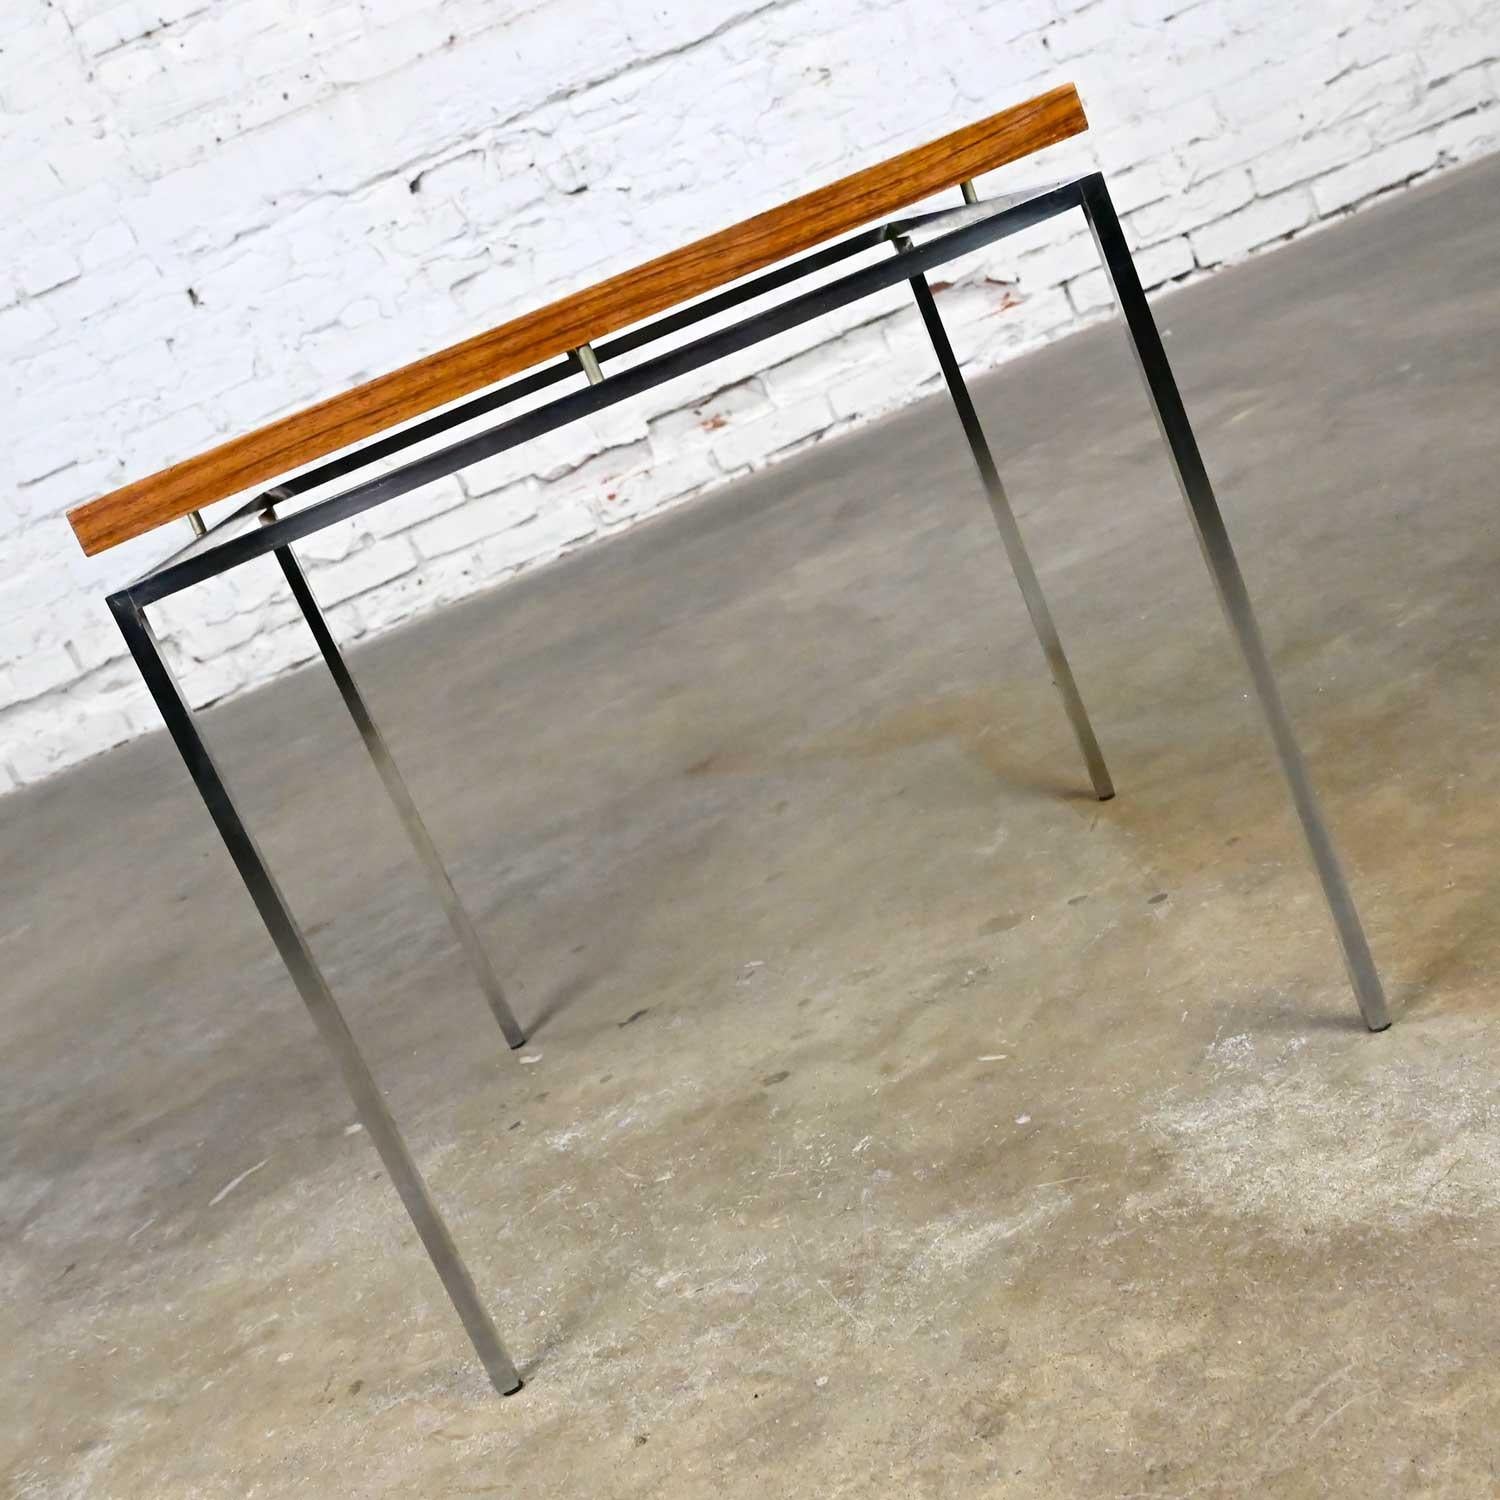 Danish Scandinavian Modern Rosewood & Chrome End Table by Knud Joos for Jason Mobler For Sale